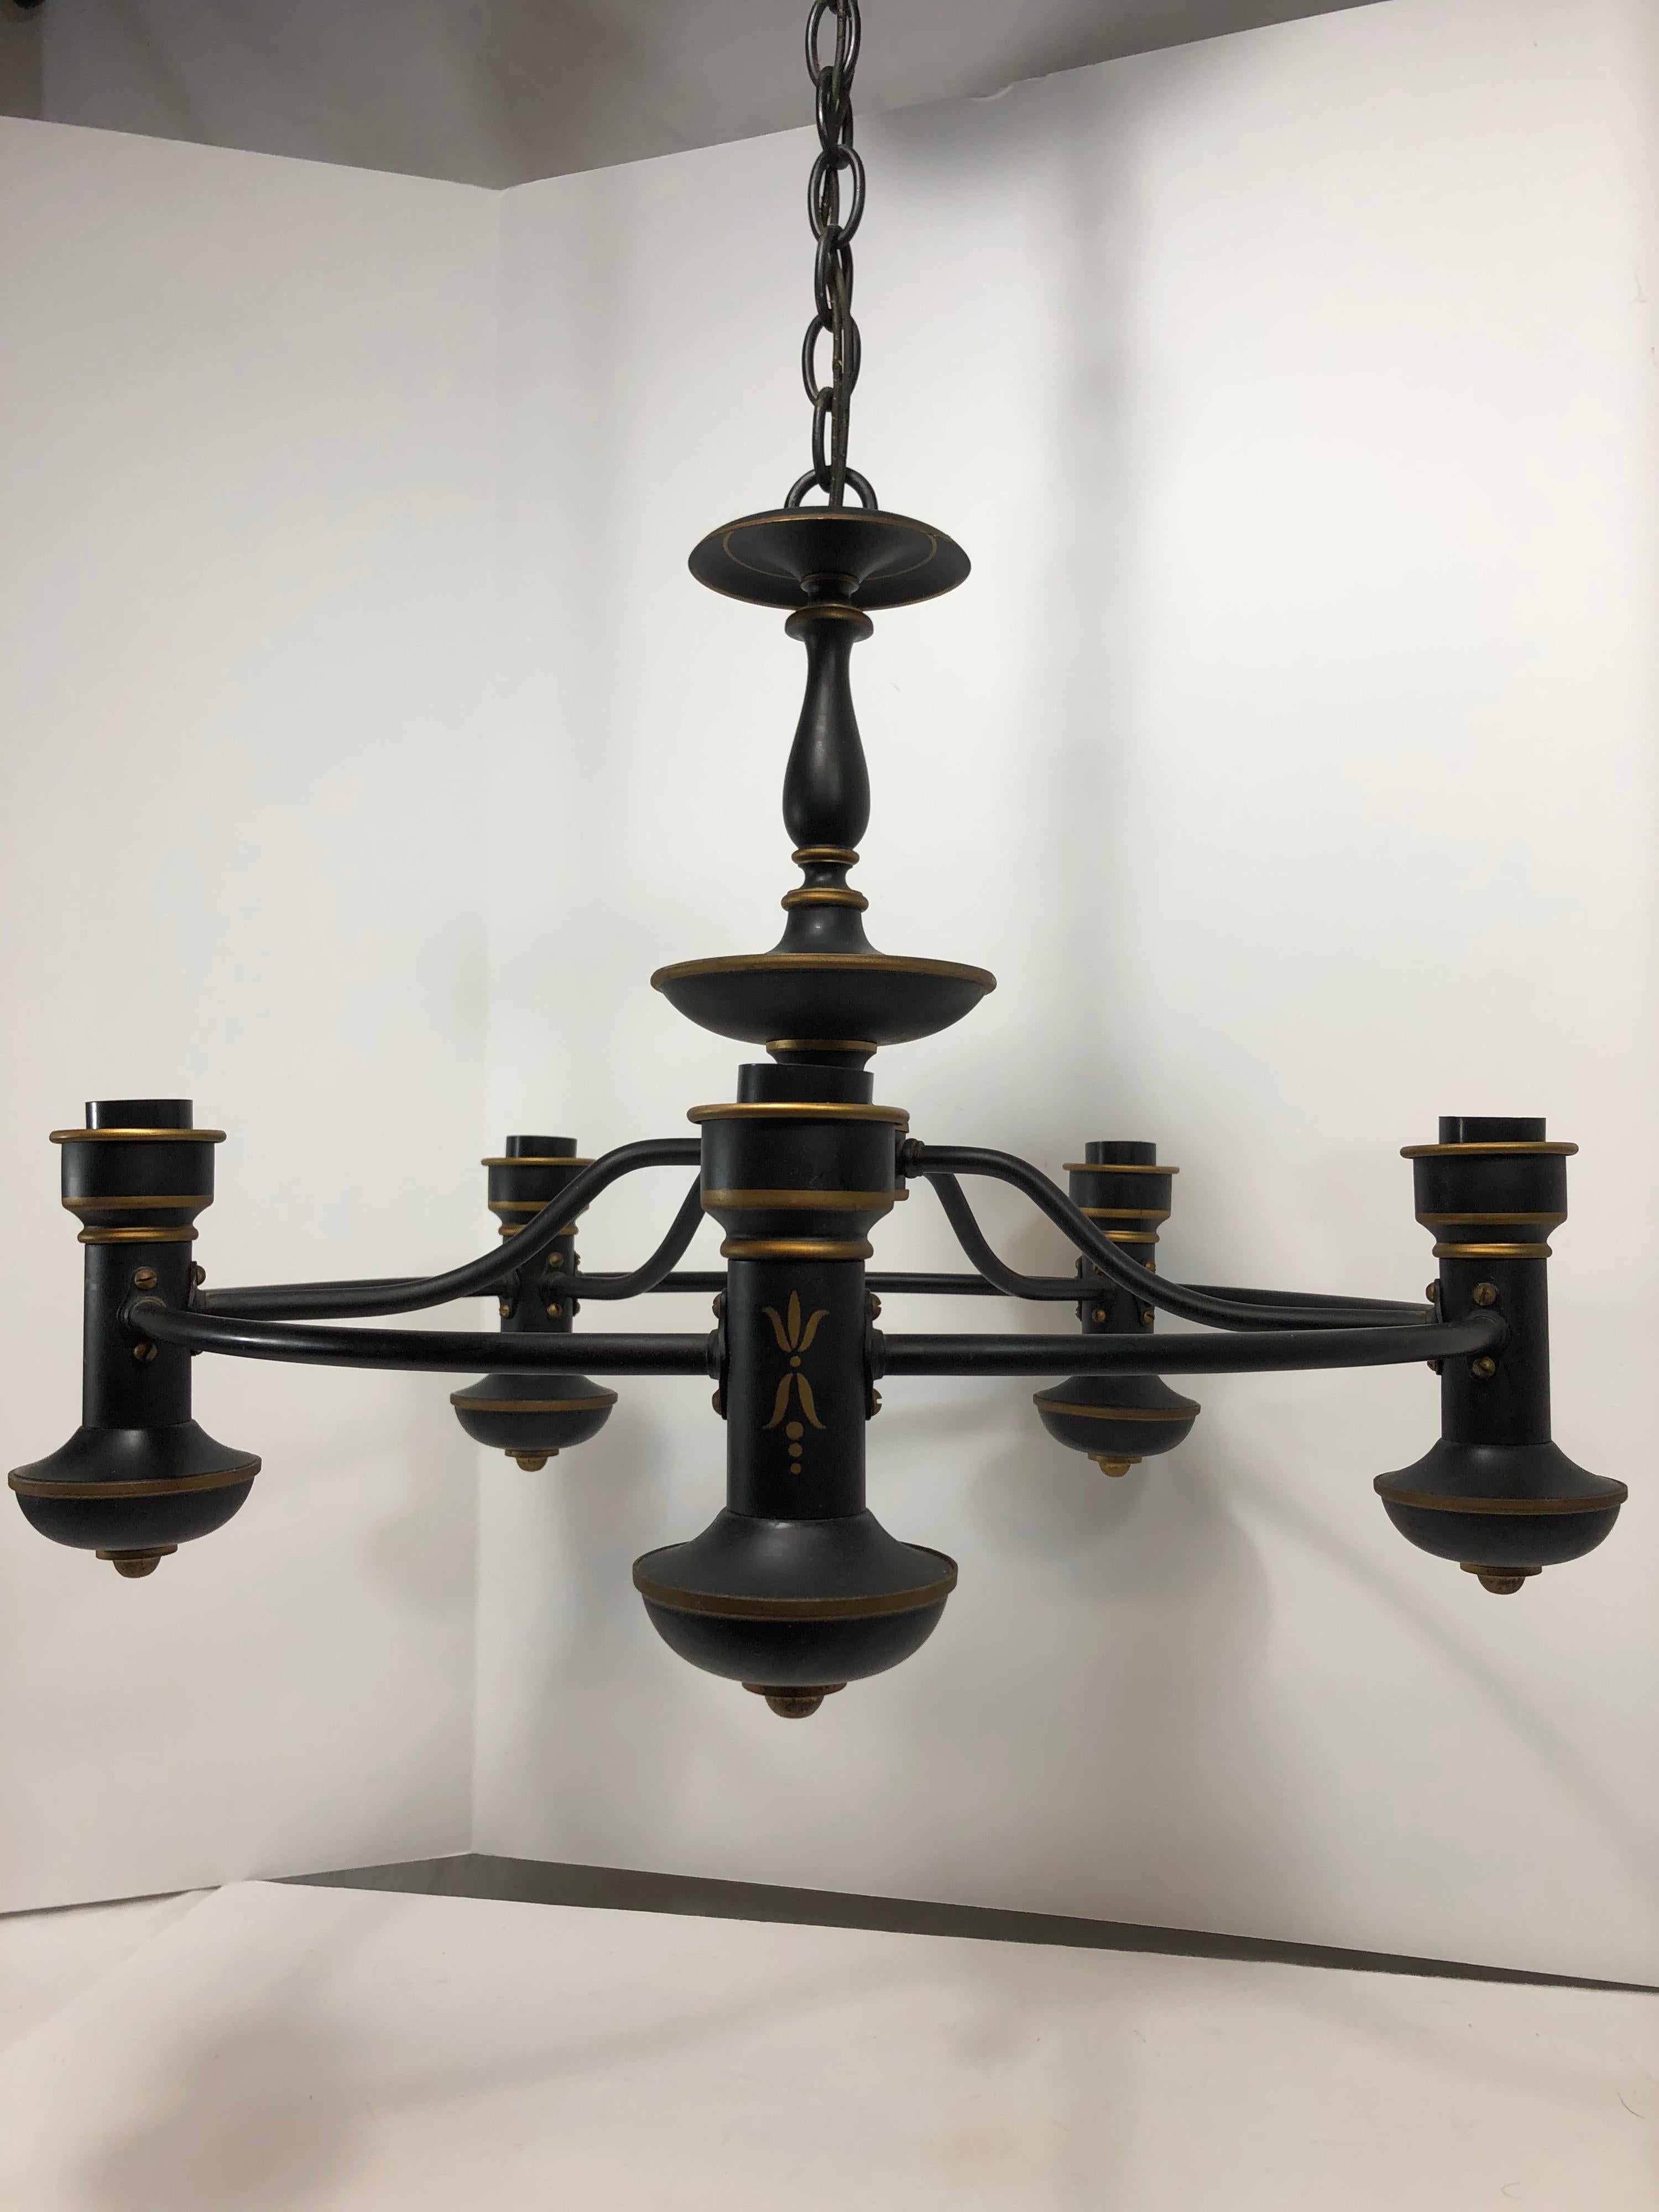 Tole painted metal chandelier in black and gold. Five arms, with original ceiling cap. Working condition. Would look great with old style Edison bulbs.